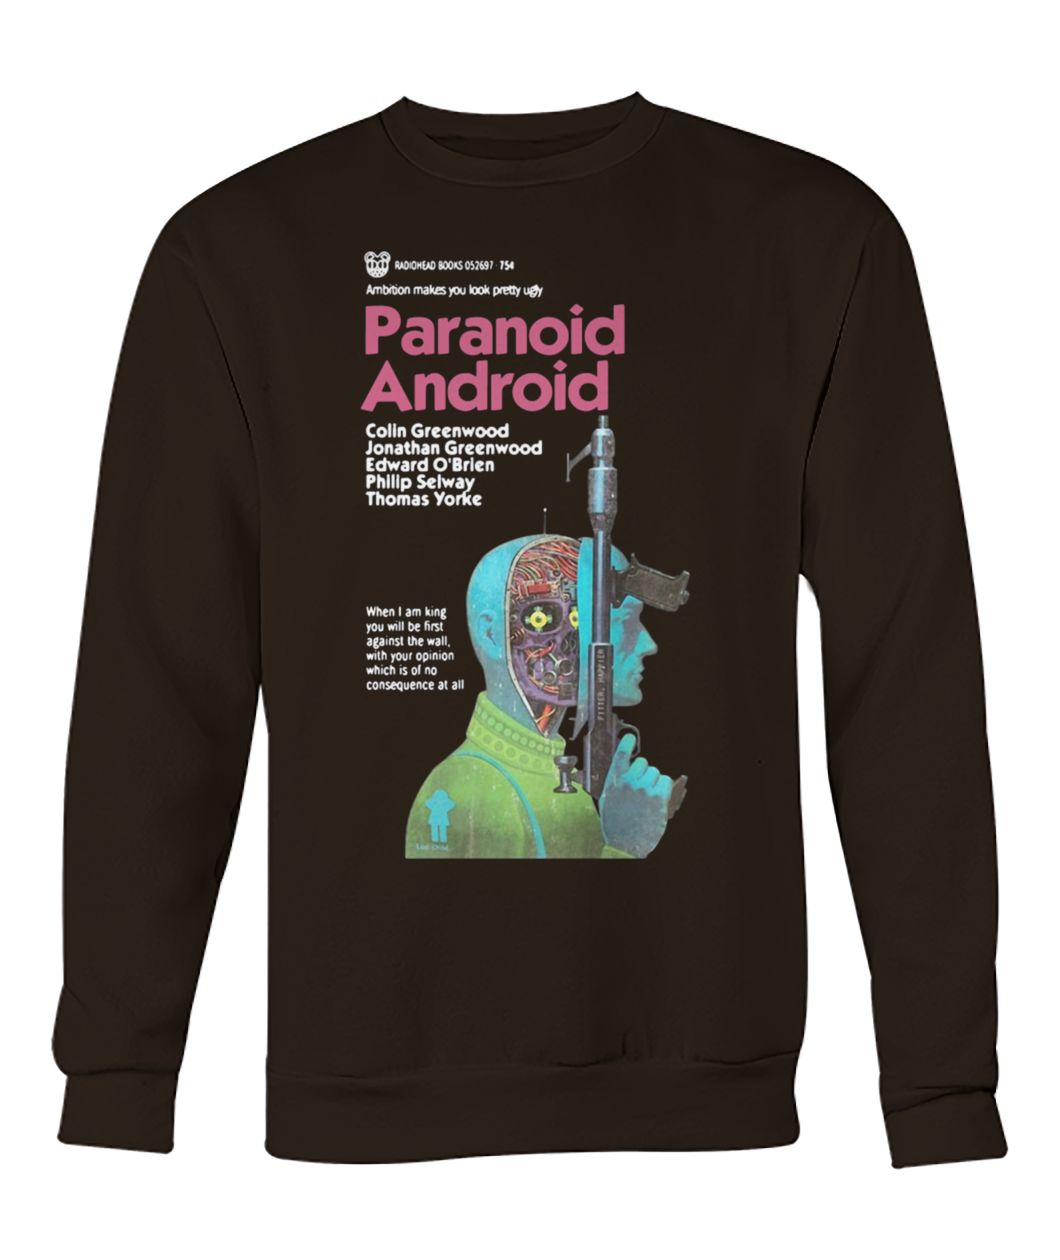 Paranoid android ambition makes you look pretty ugly crew neck sweatshirt